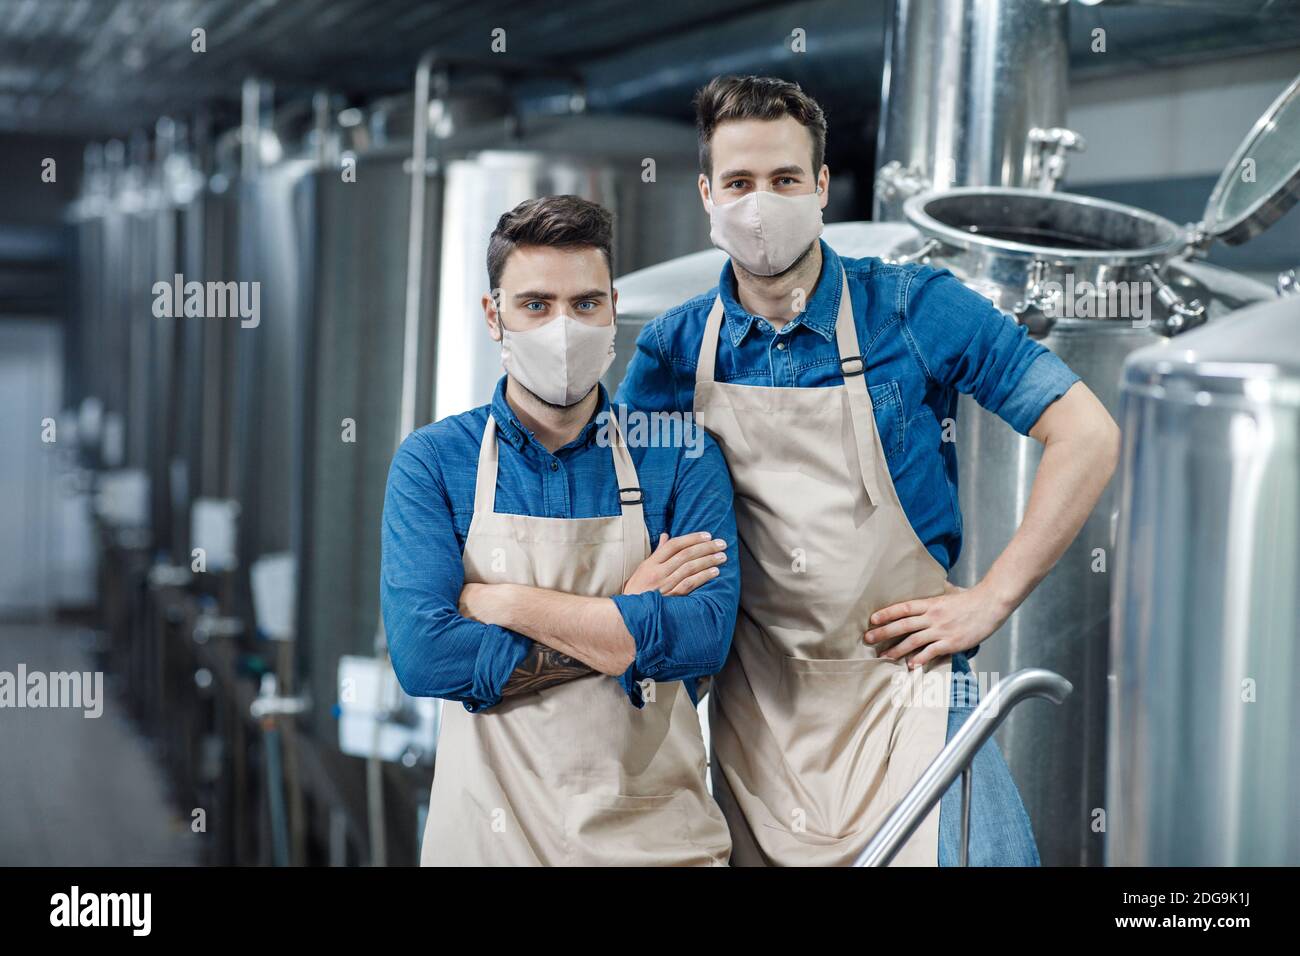 Industrial production, craft beer and brewery workers Stock Photo